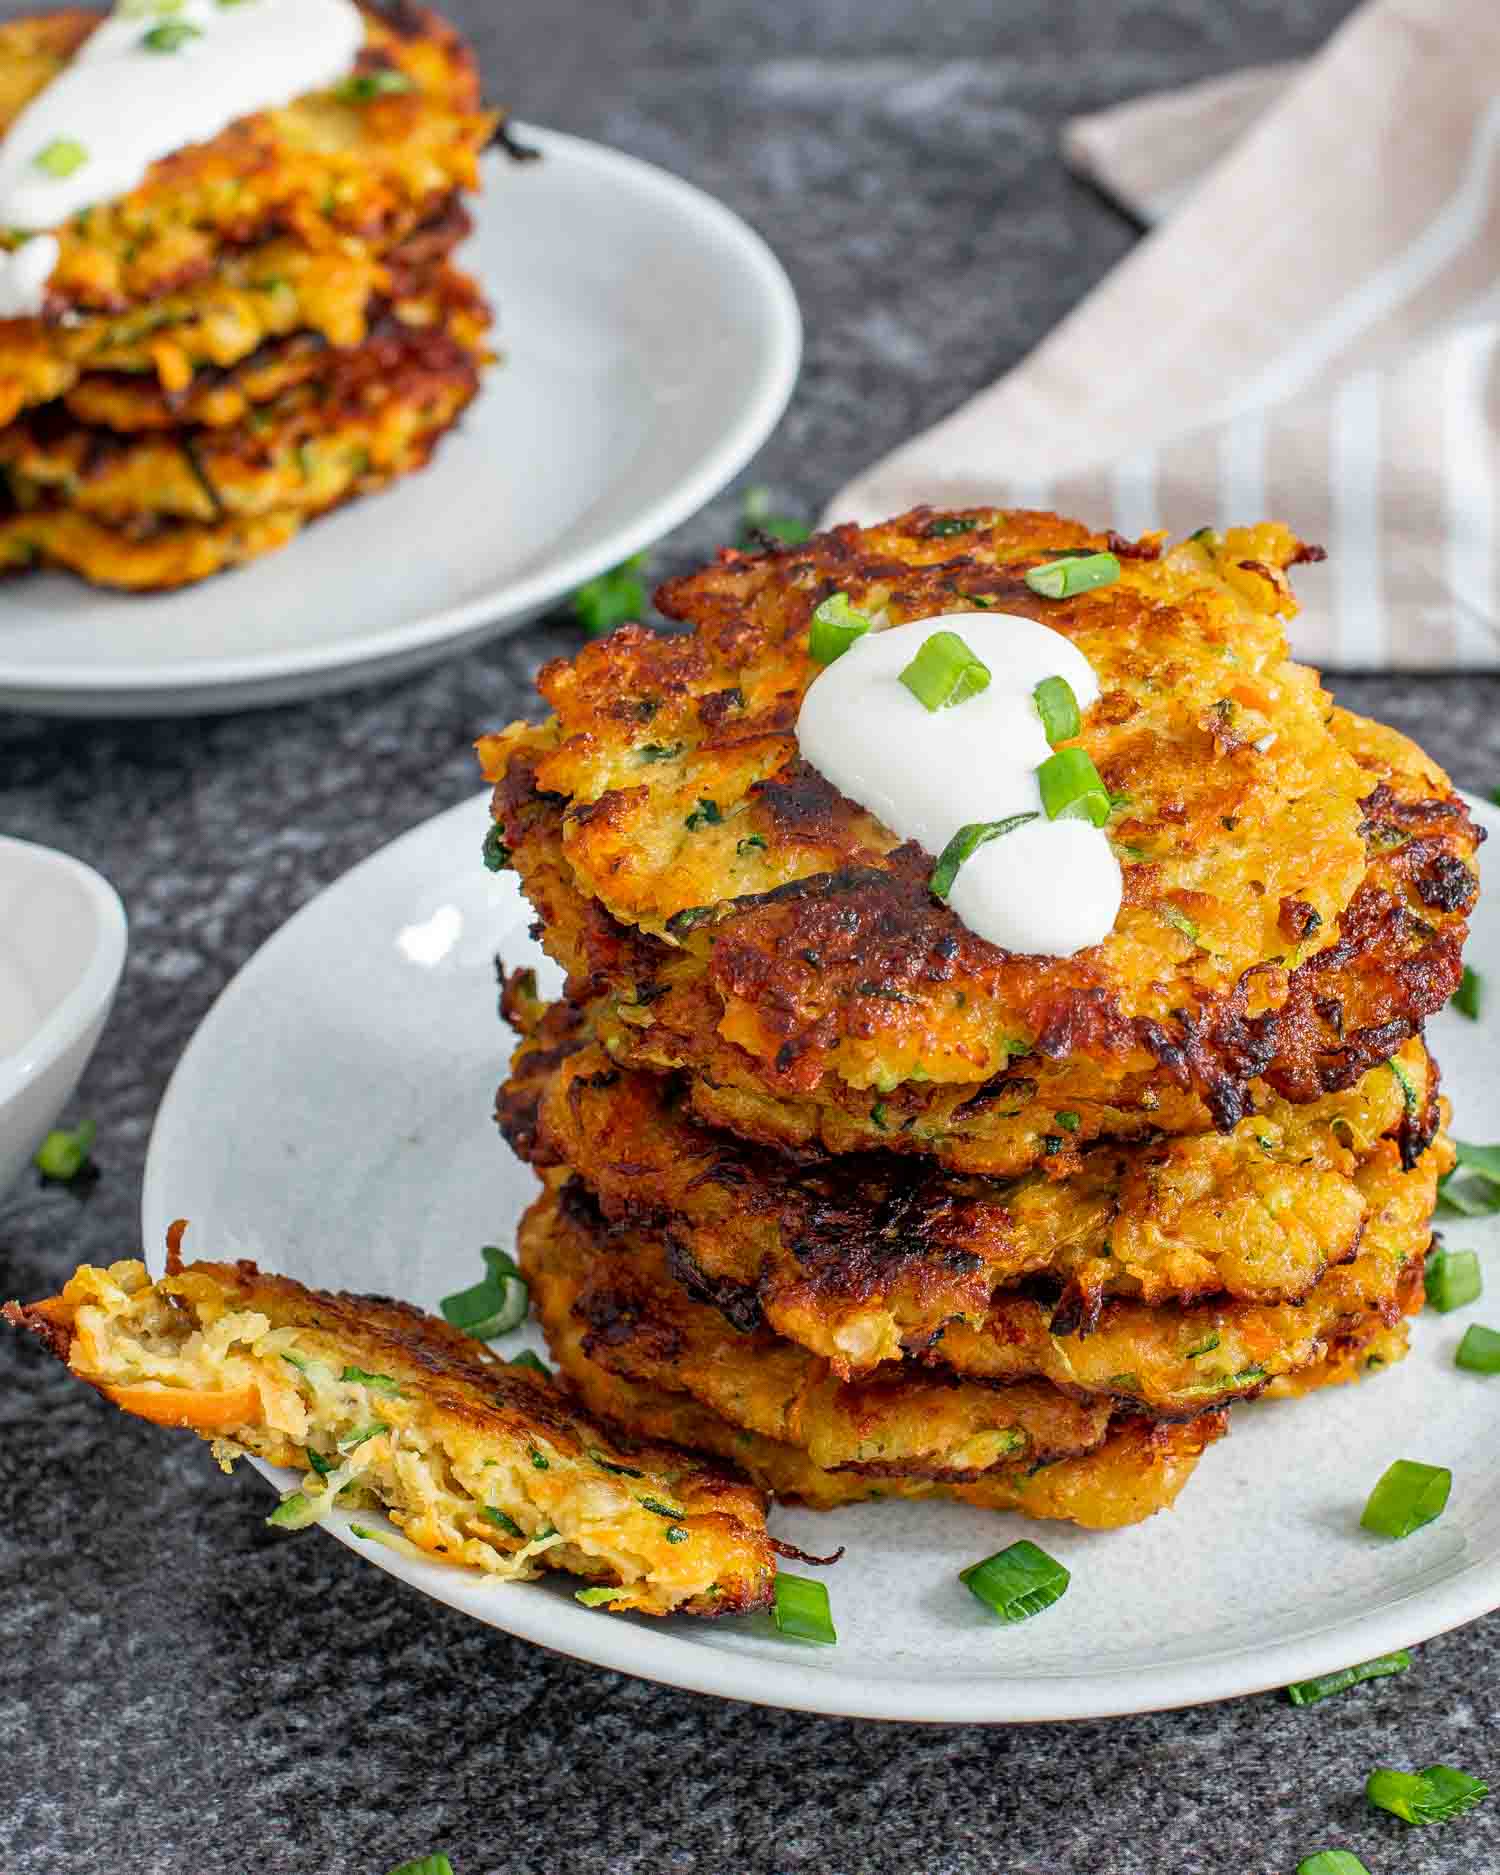 vegetable fritters on a plate garnished with parsley and a dollop of sour cream.f